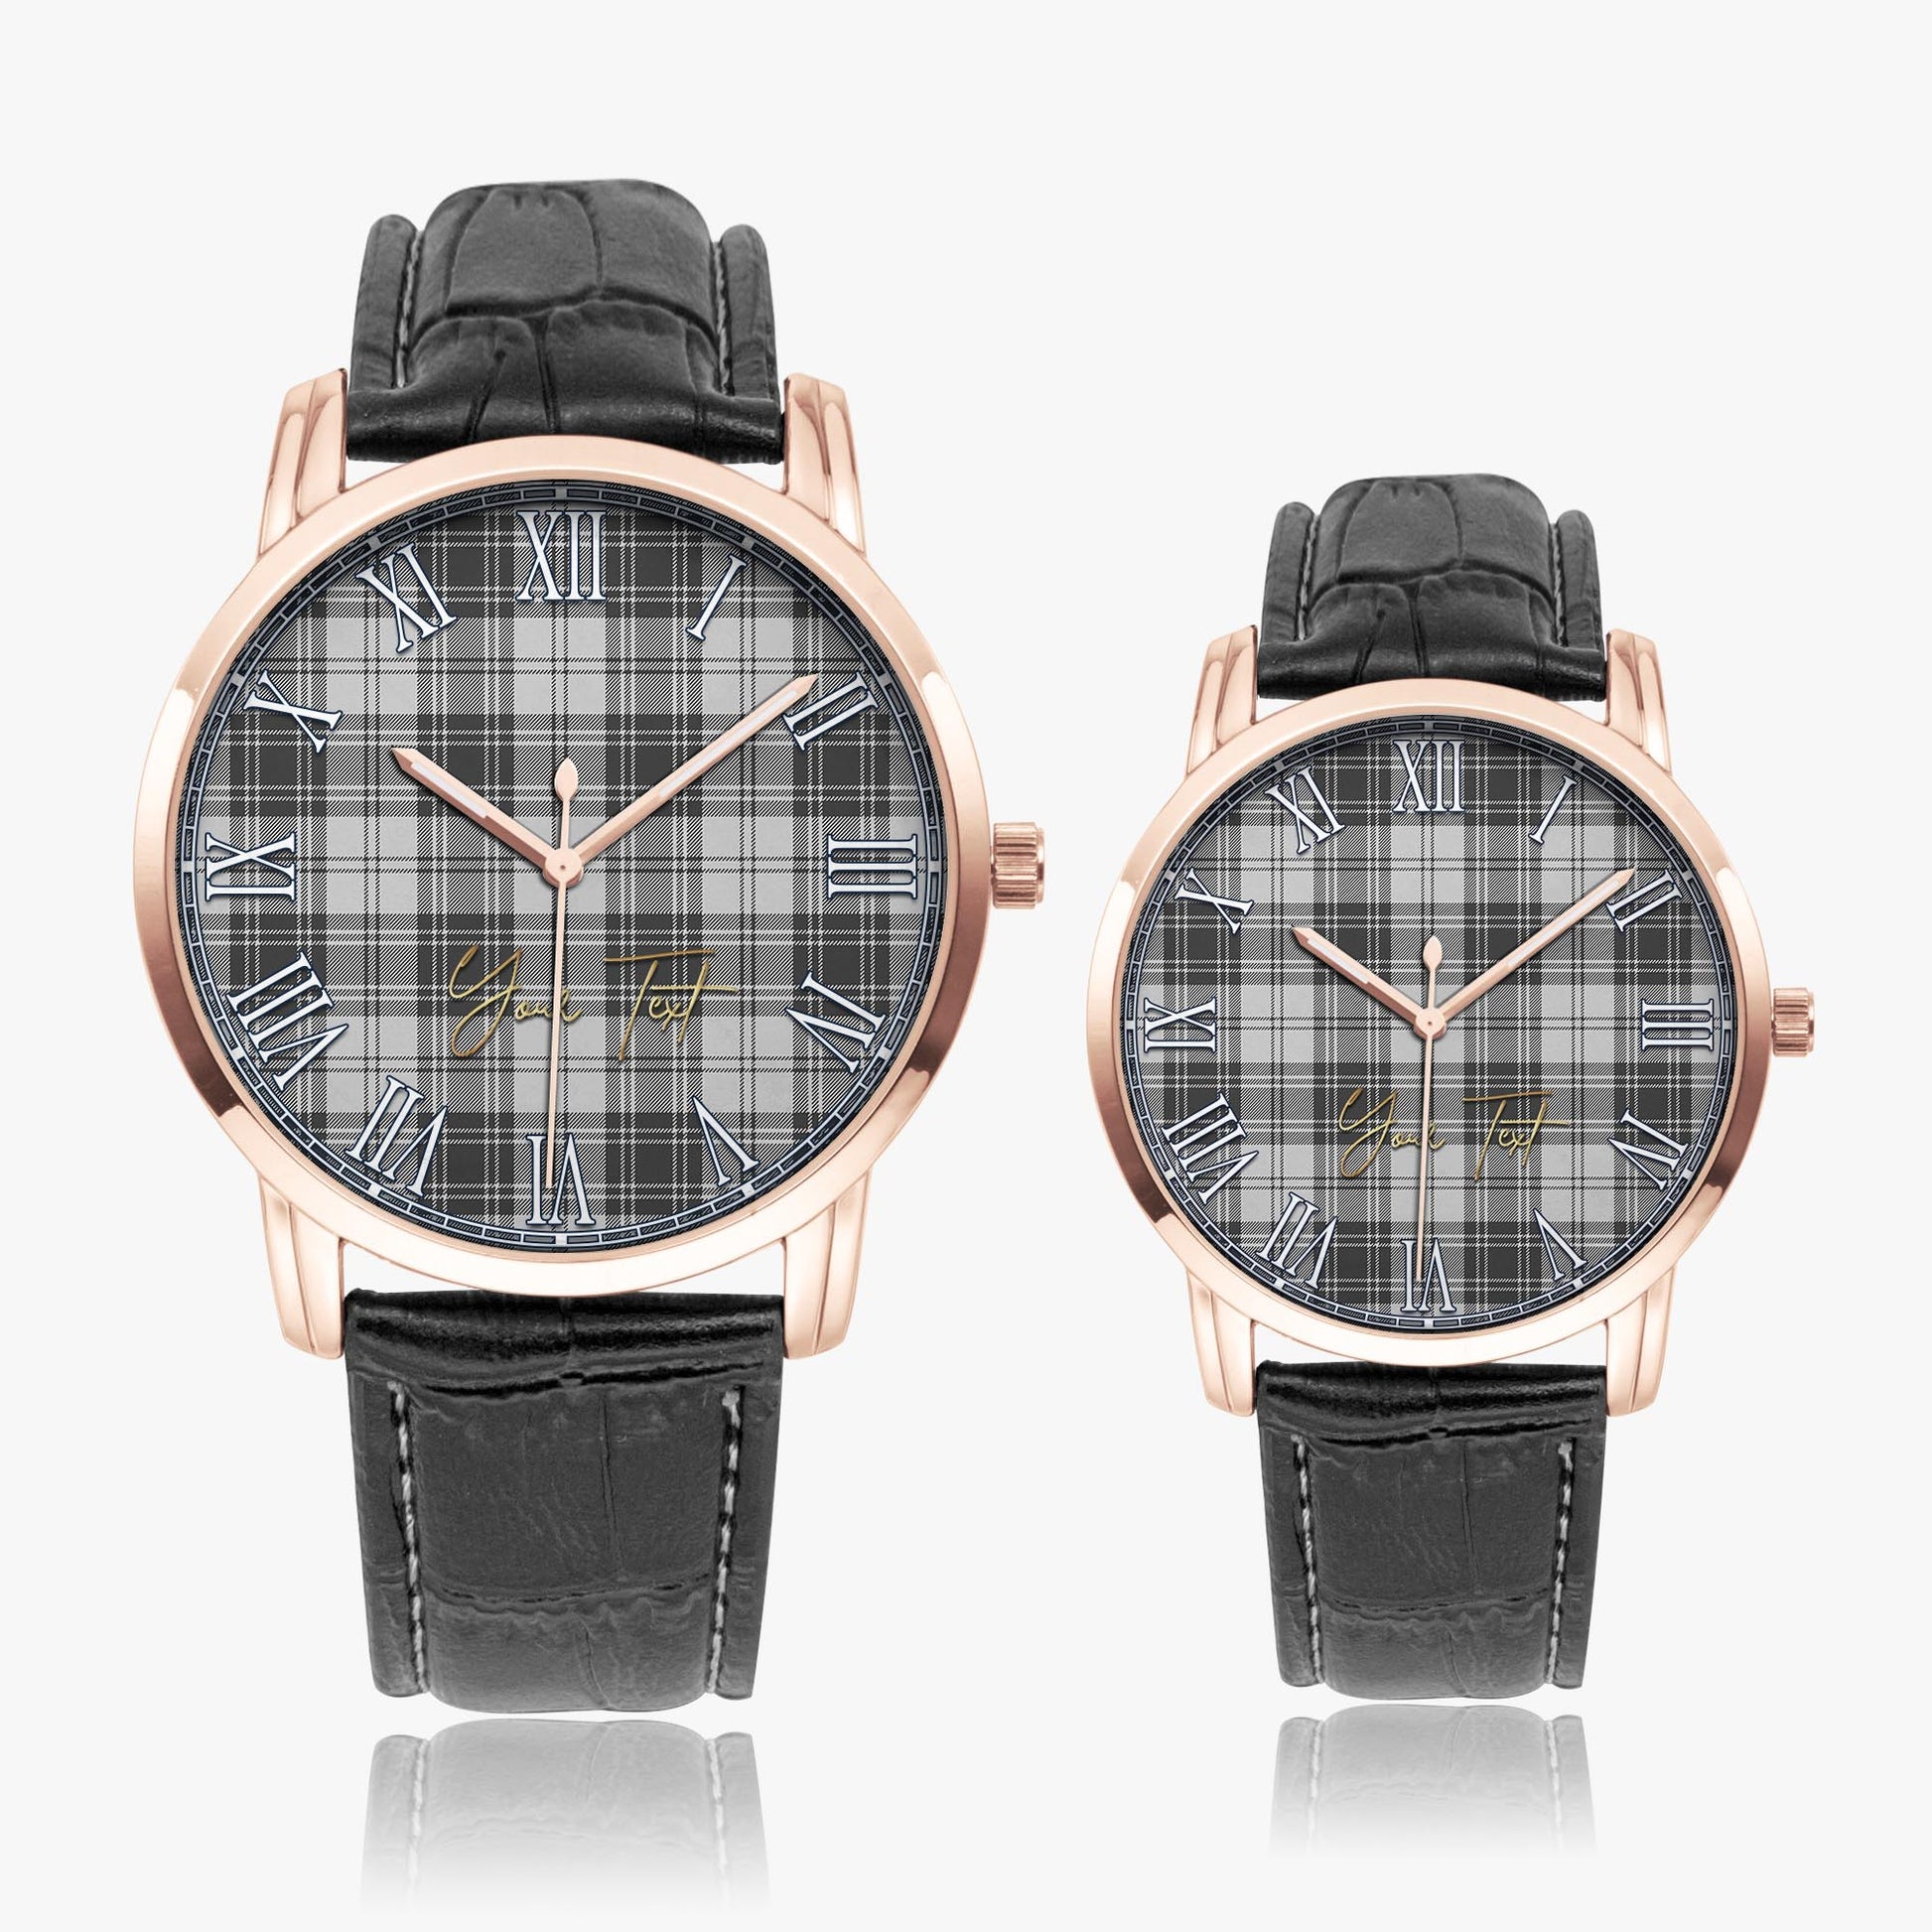 Glen Tartan Personalized Your Text Leather Trap Quartz Watch Wide Type Rose Gold Case With Black Leather Strap - Tartanvibesclothing